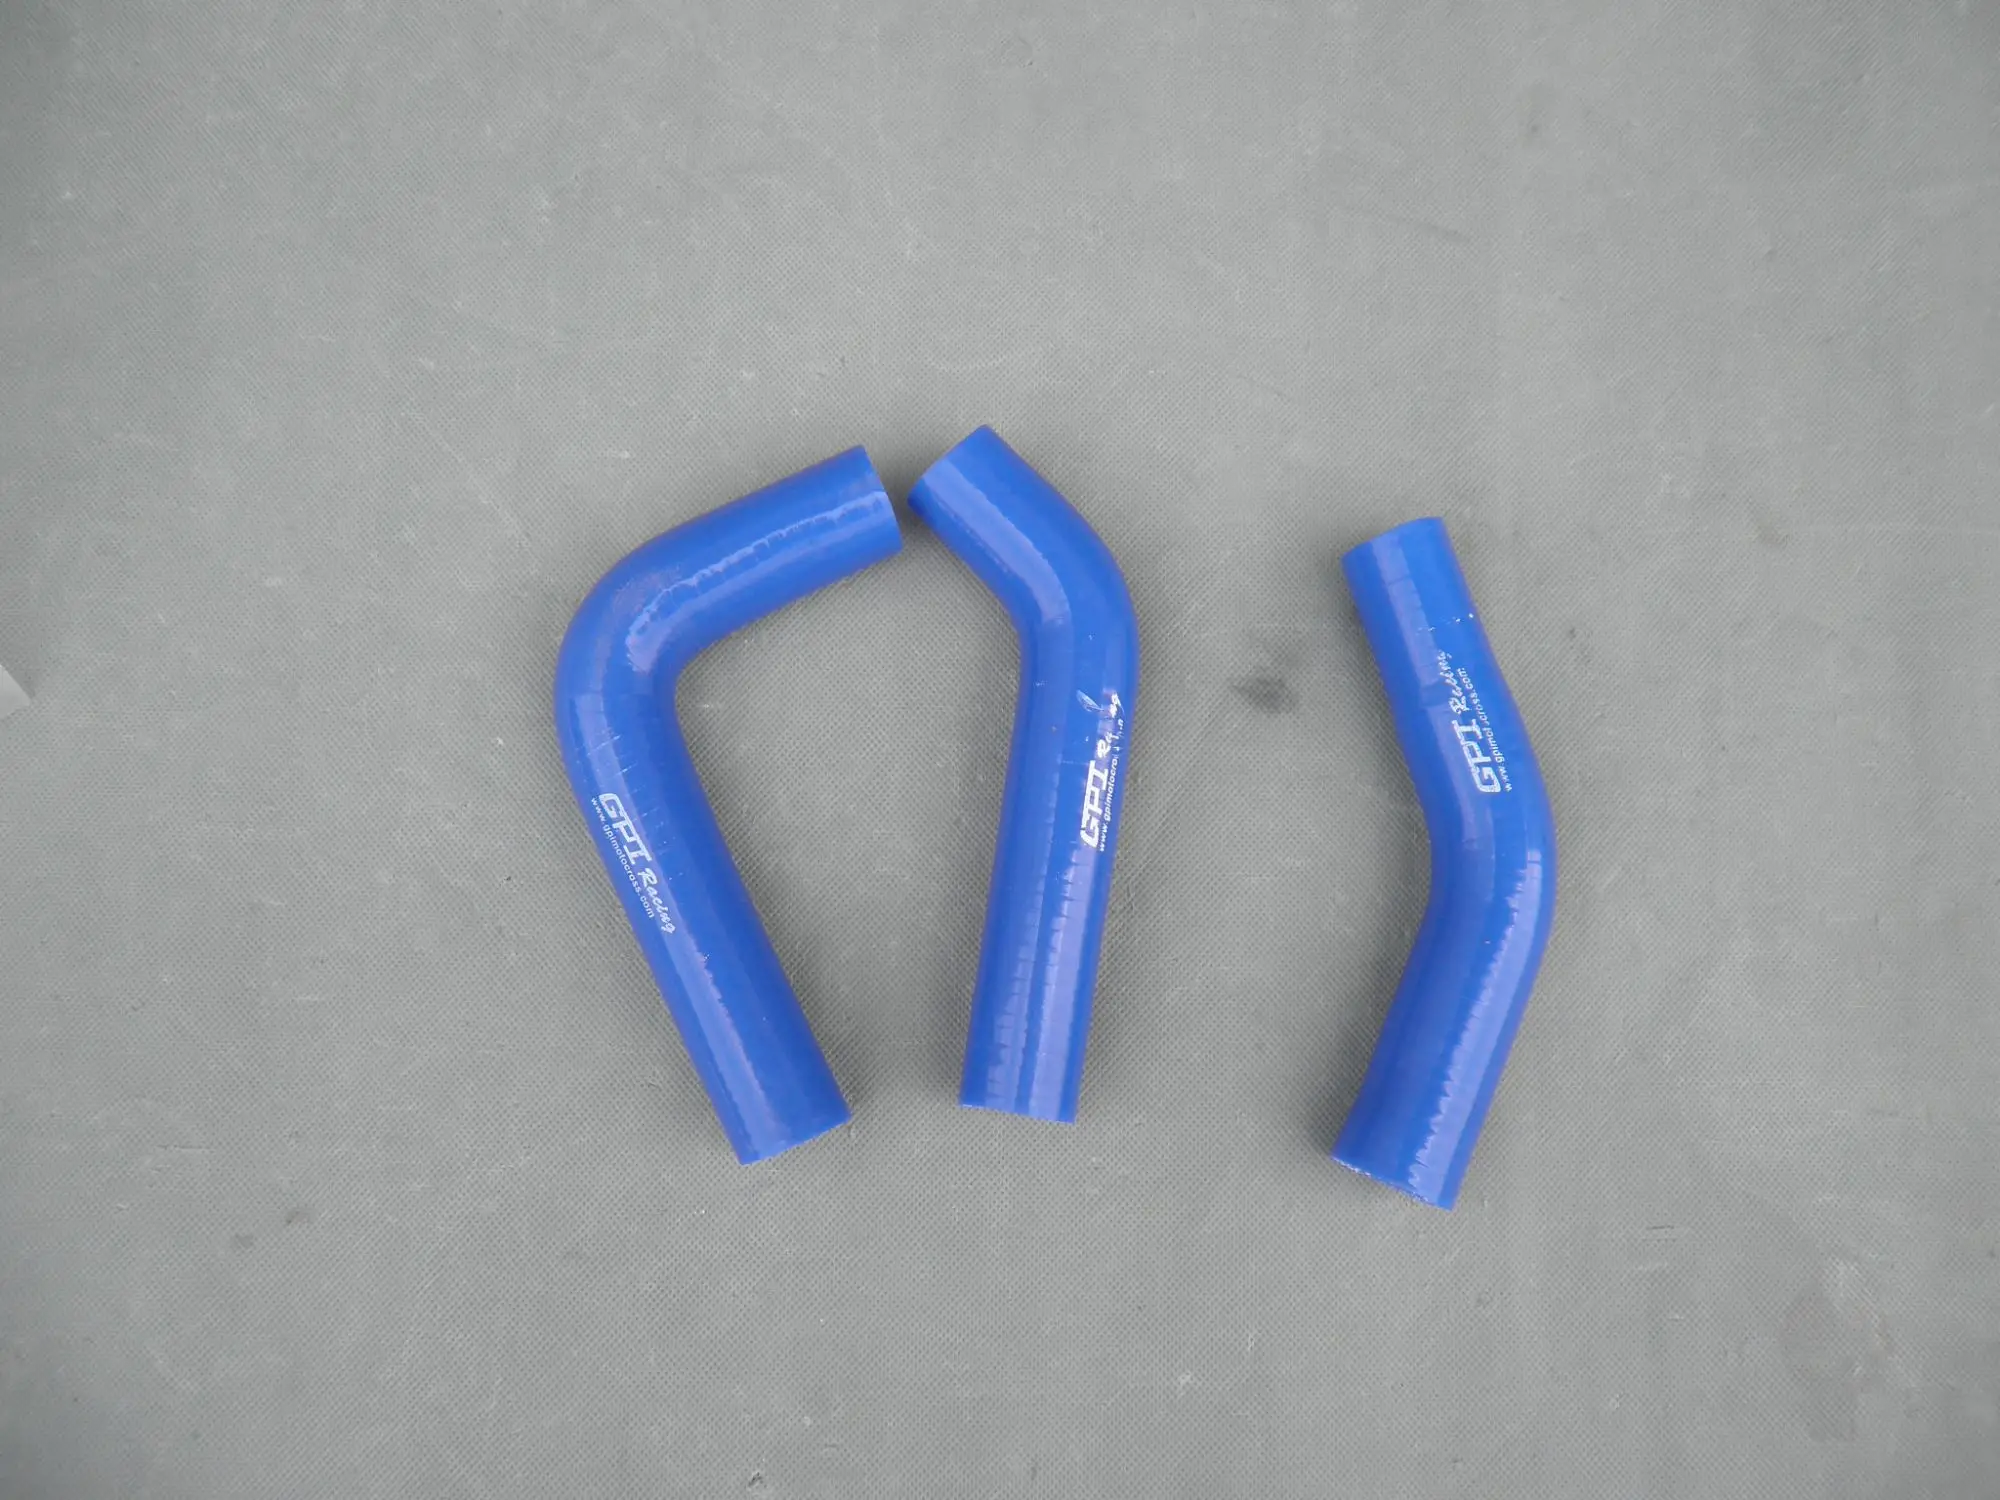 

For Yamaha RZ350 RRZ350 1984-1985 / RD350 RD250 1973-1975 RZ RRZ RD 350 250 Silicone Radiator Hose Pipe Tube Kit 1973 1974 1975